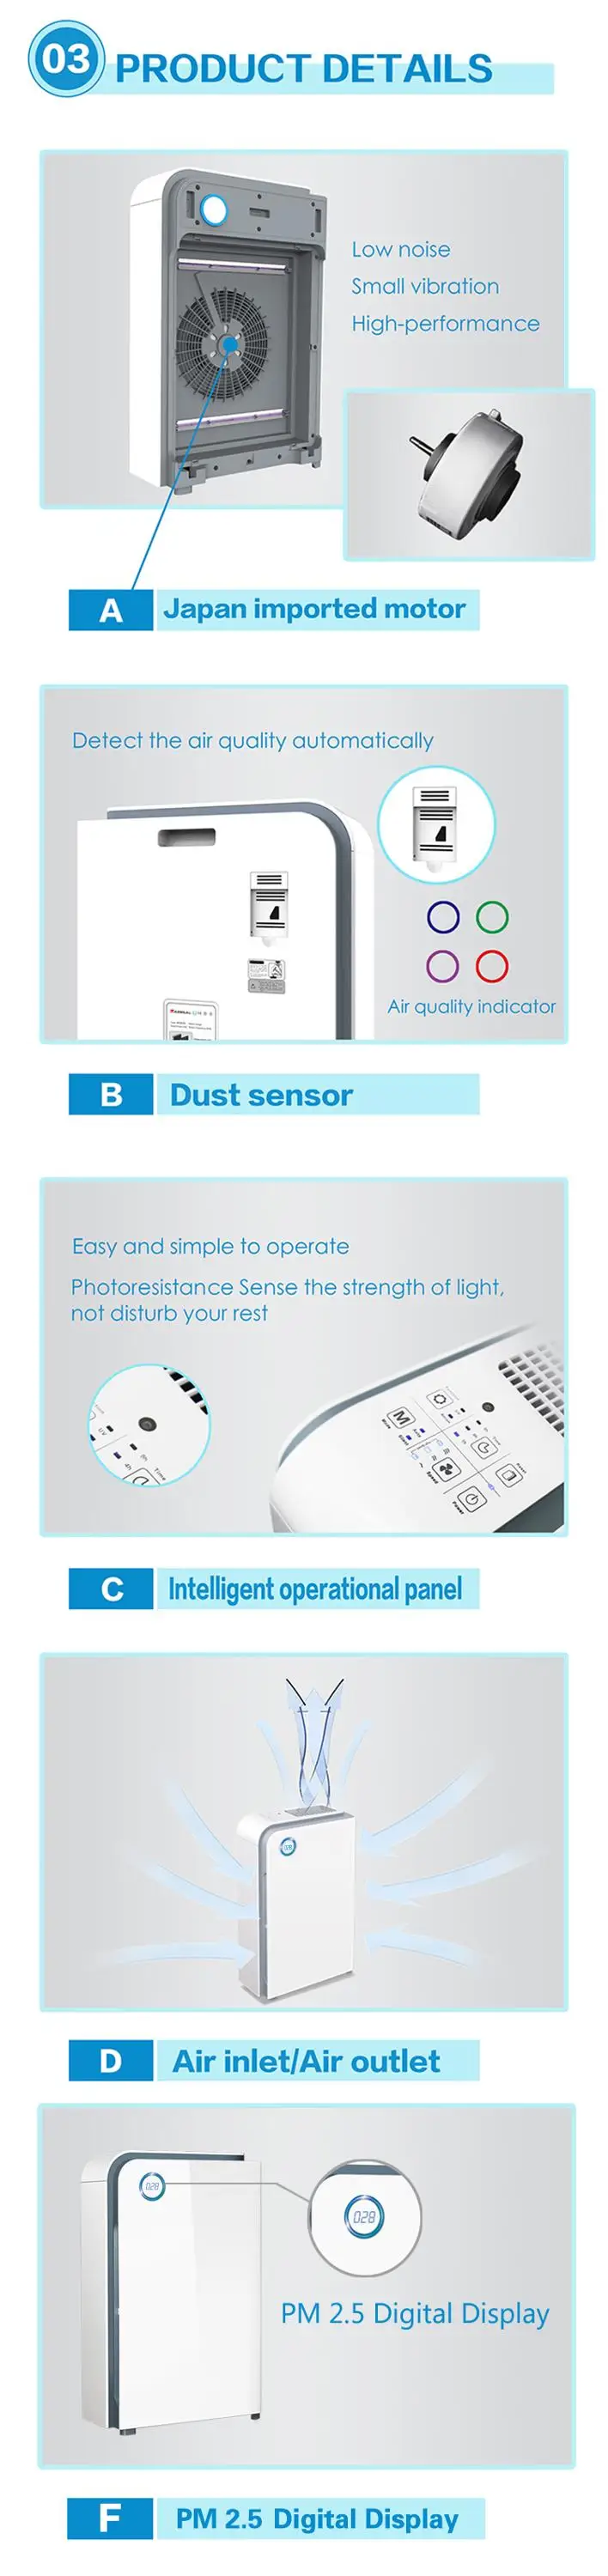 LED Display Home Personal Air Purifier For Bedroom With Hepa Filter